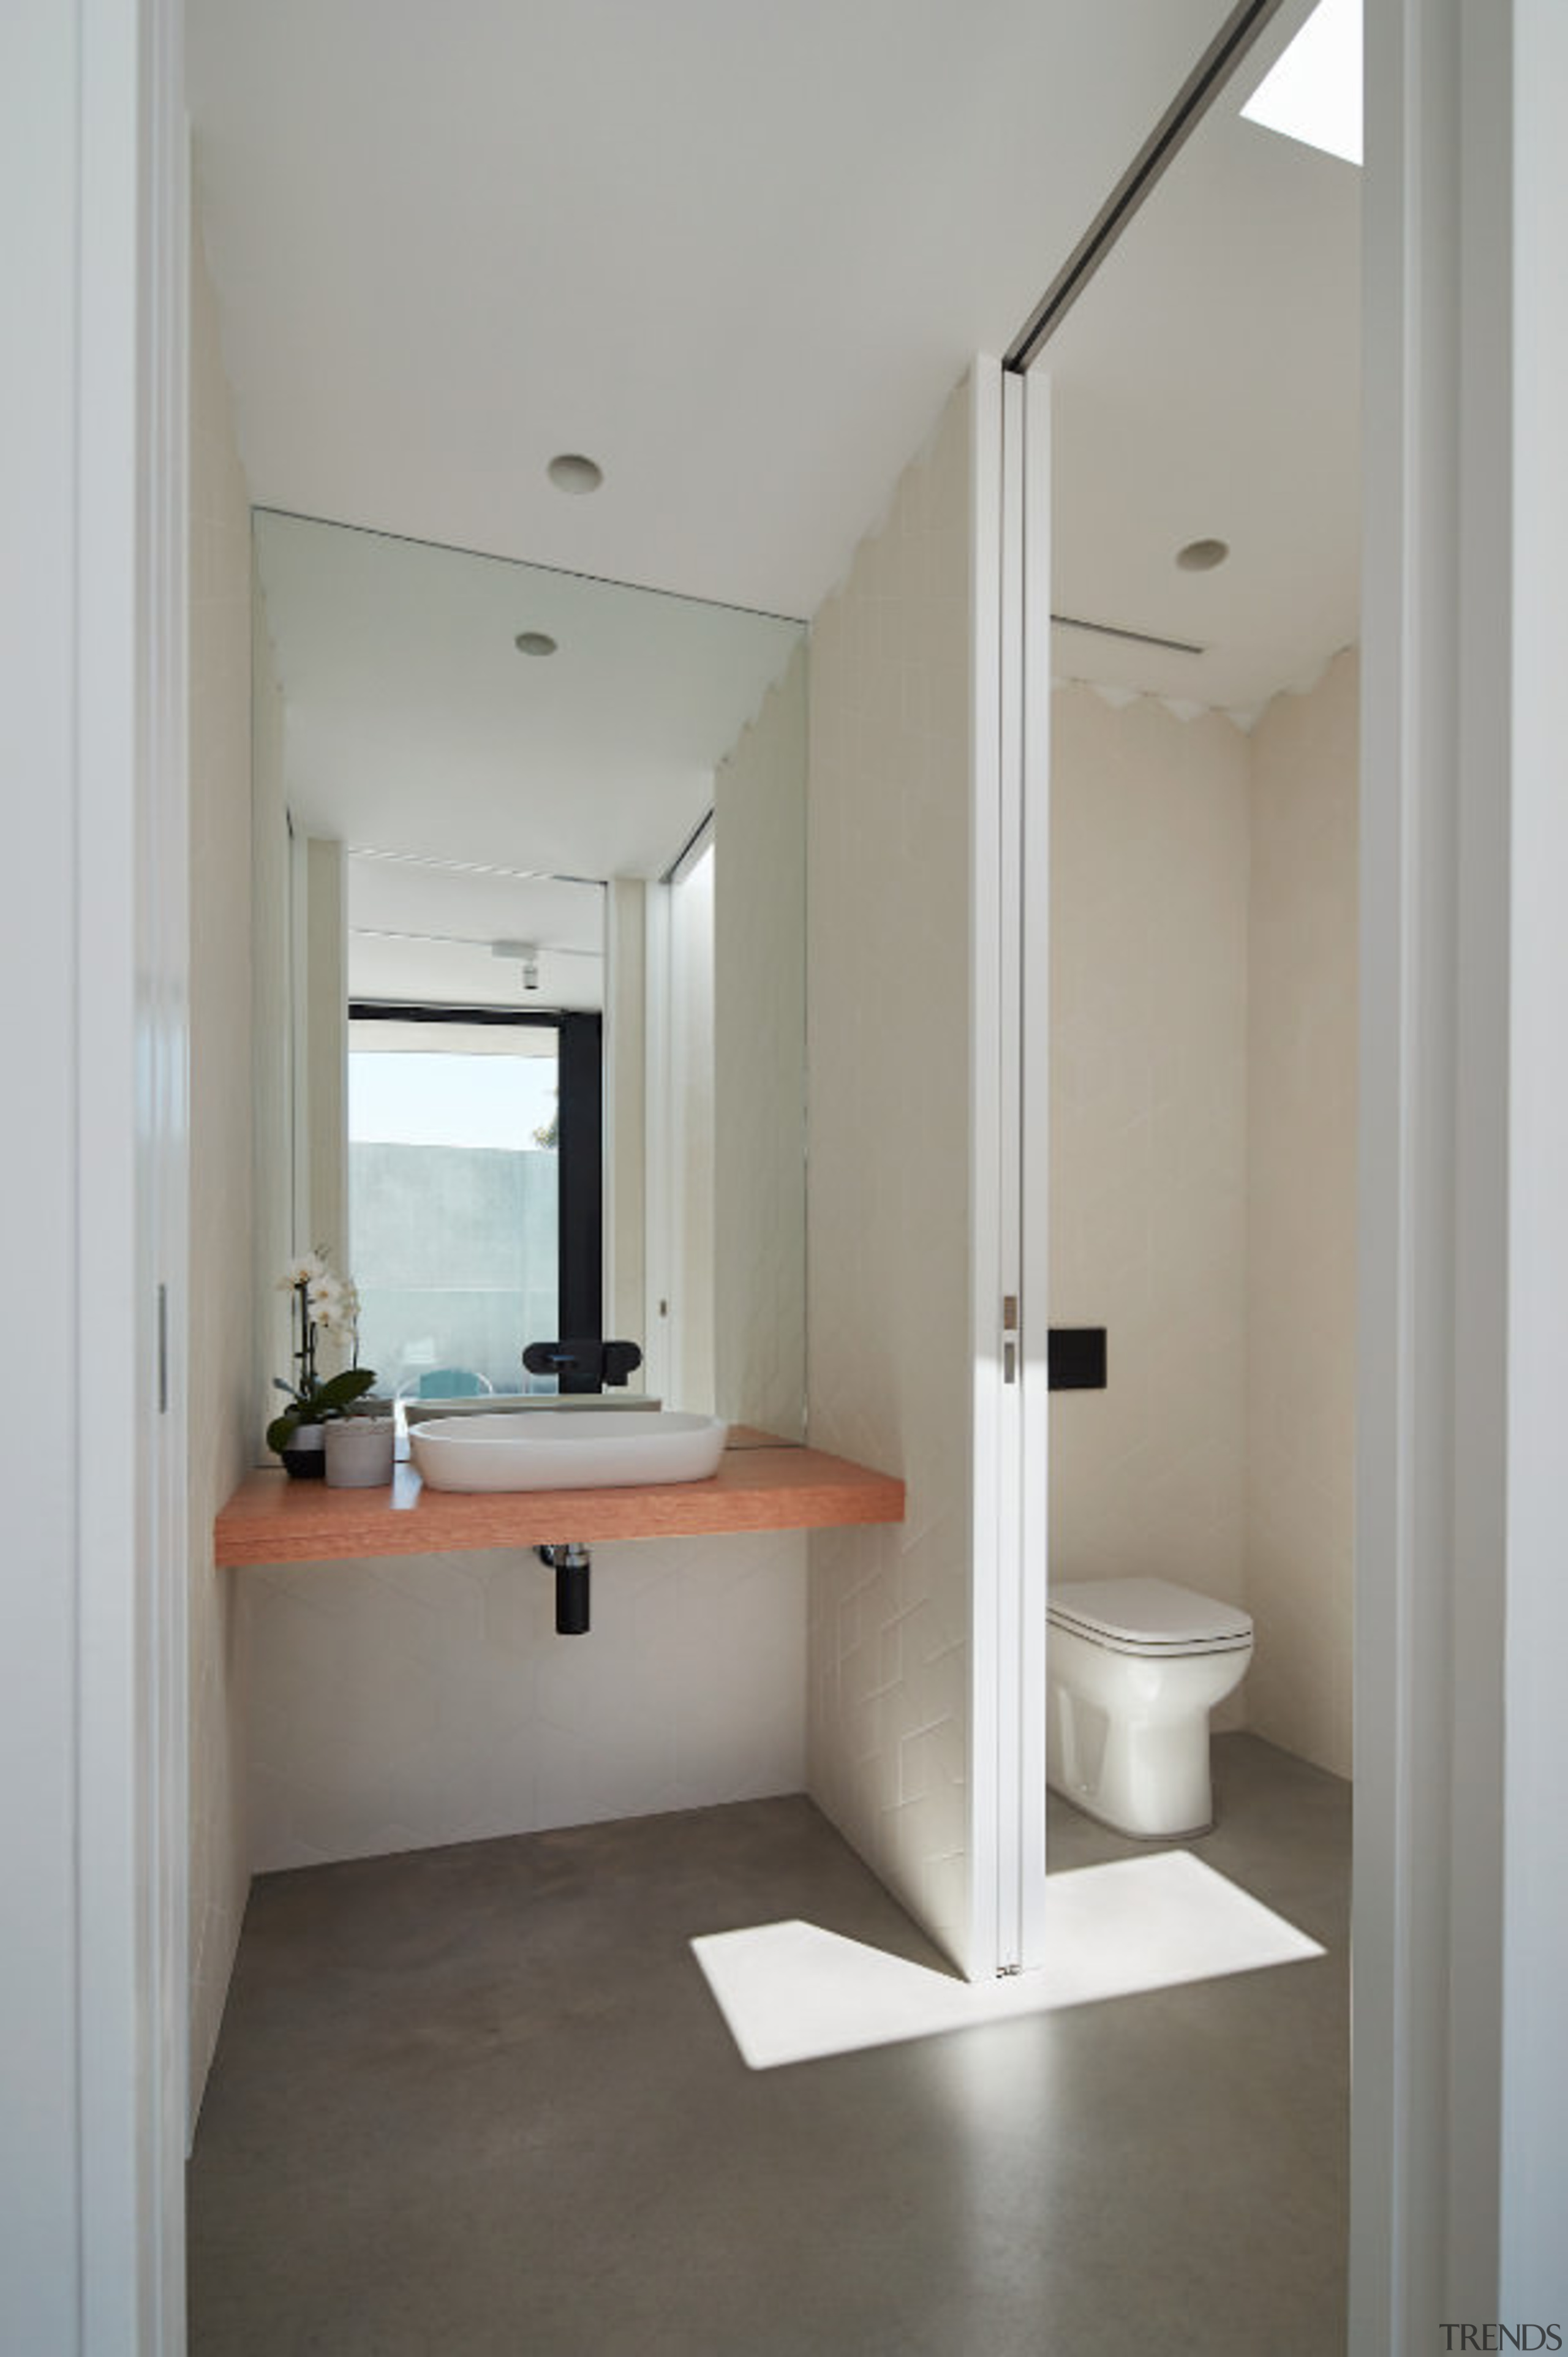 One of the bathroom with a floating vanity architecture, bathroom, ceiling, daylighting, floor, home, house, interior design, real estate, room, sink, window, gray